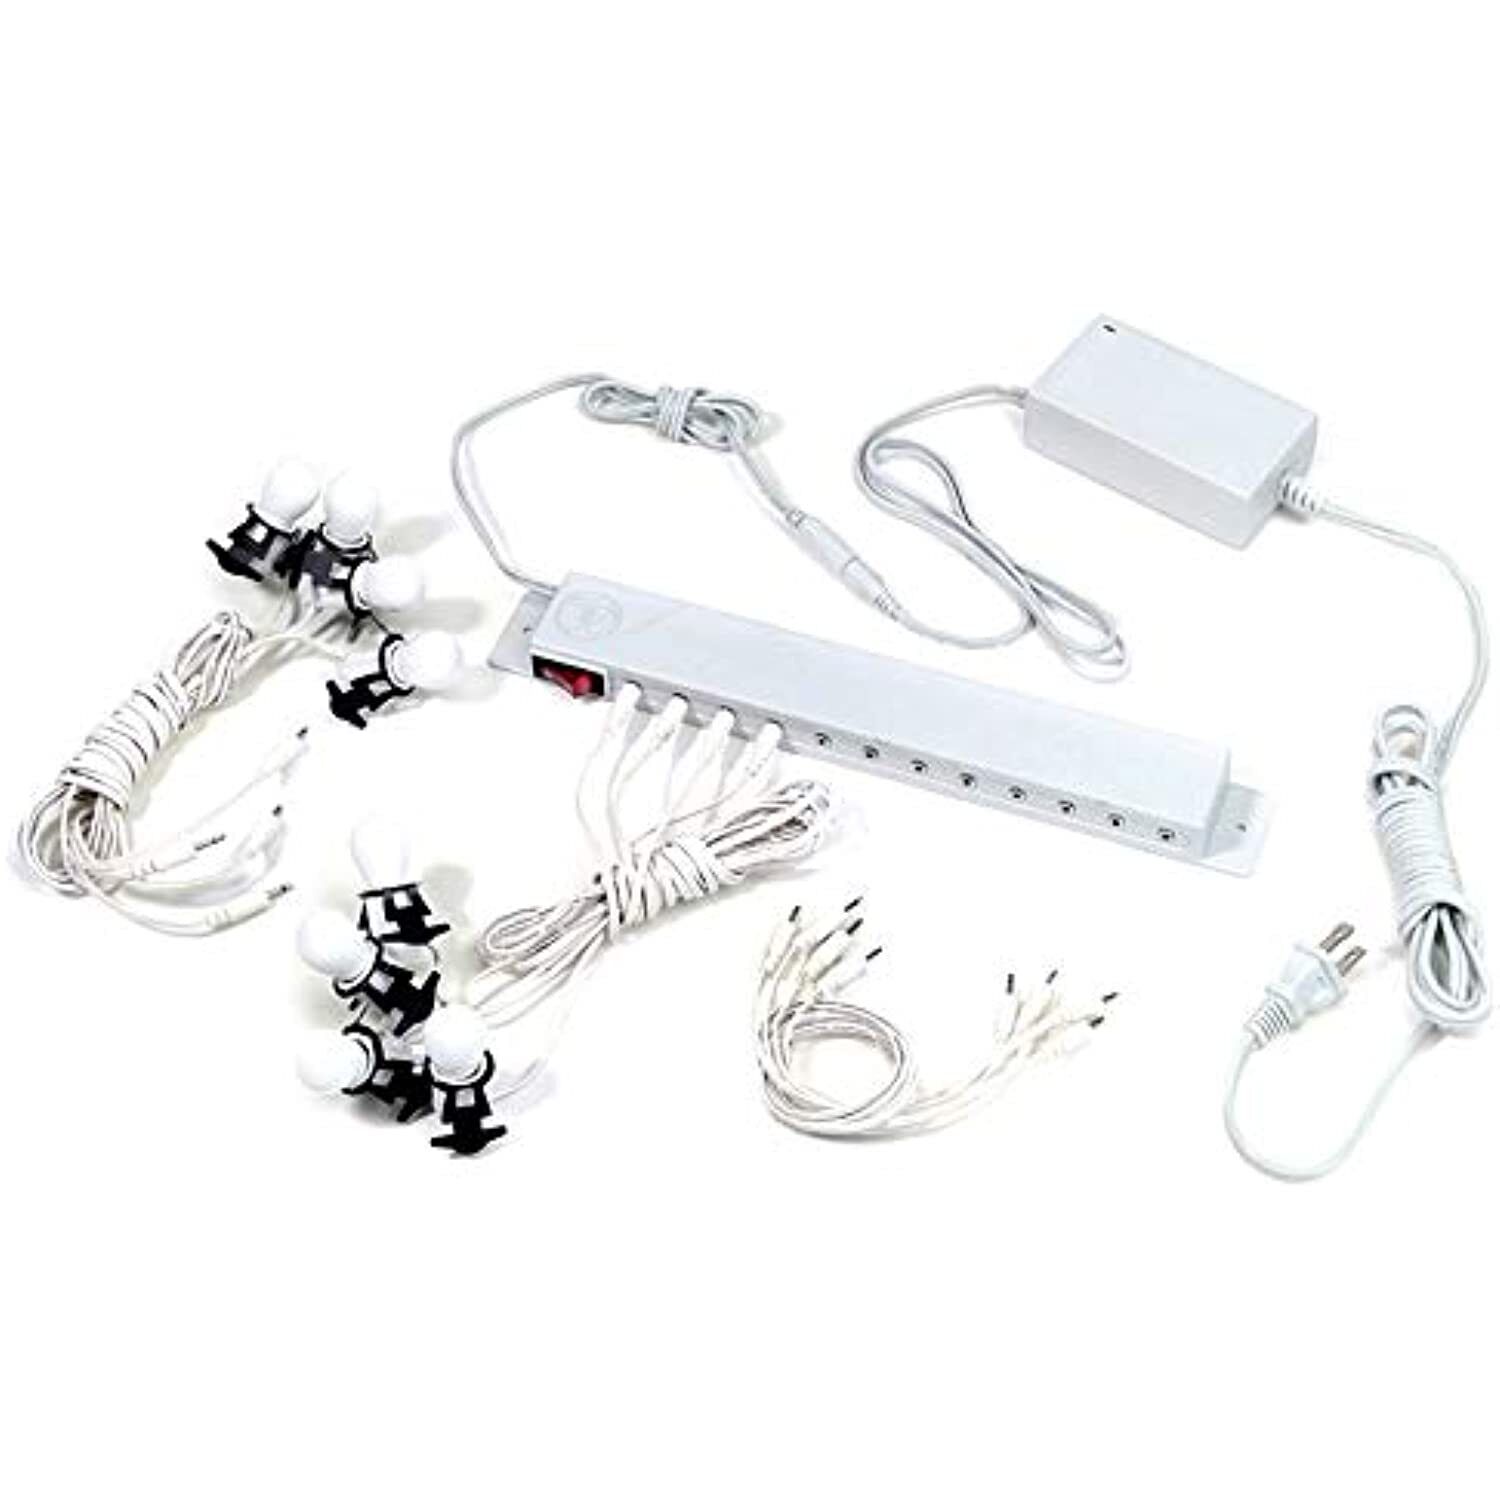 Department 56 Building and Accessory Lighting System Adapter 56.53500 9 Building